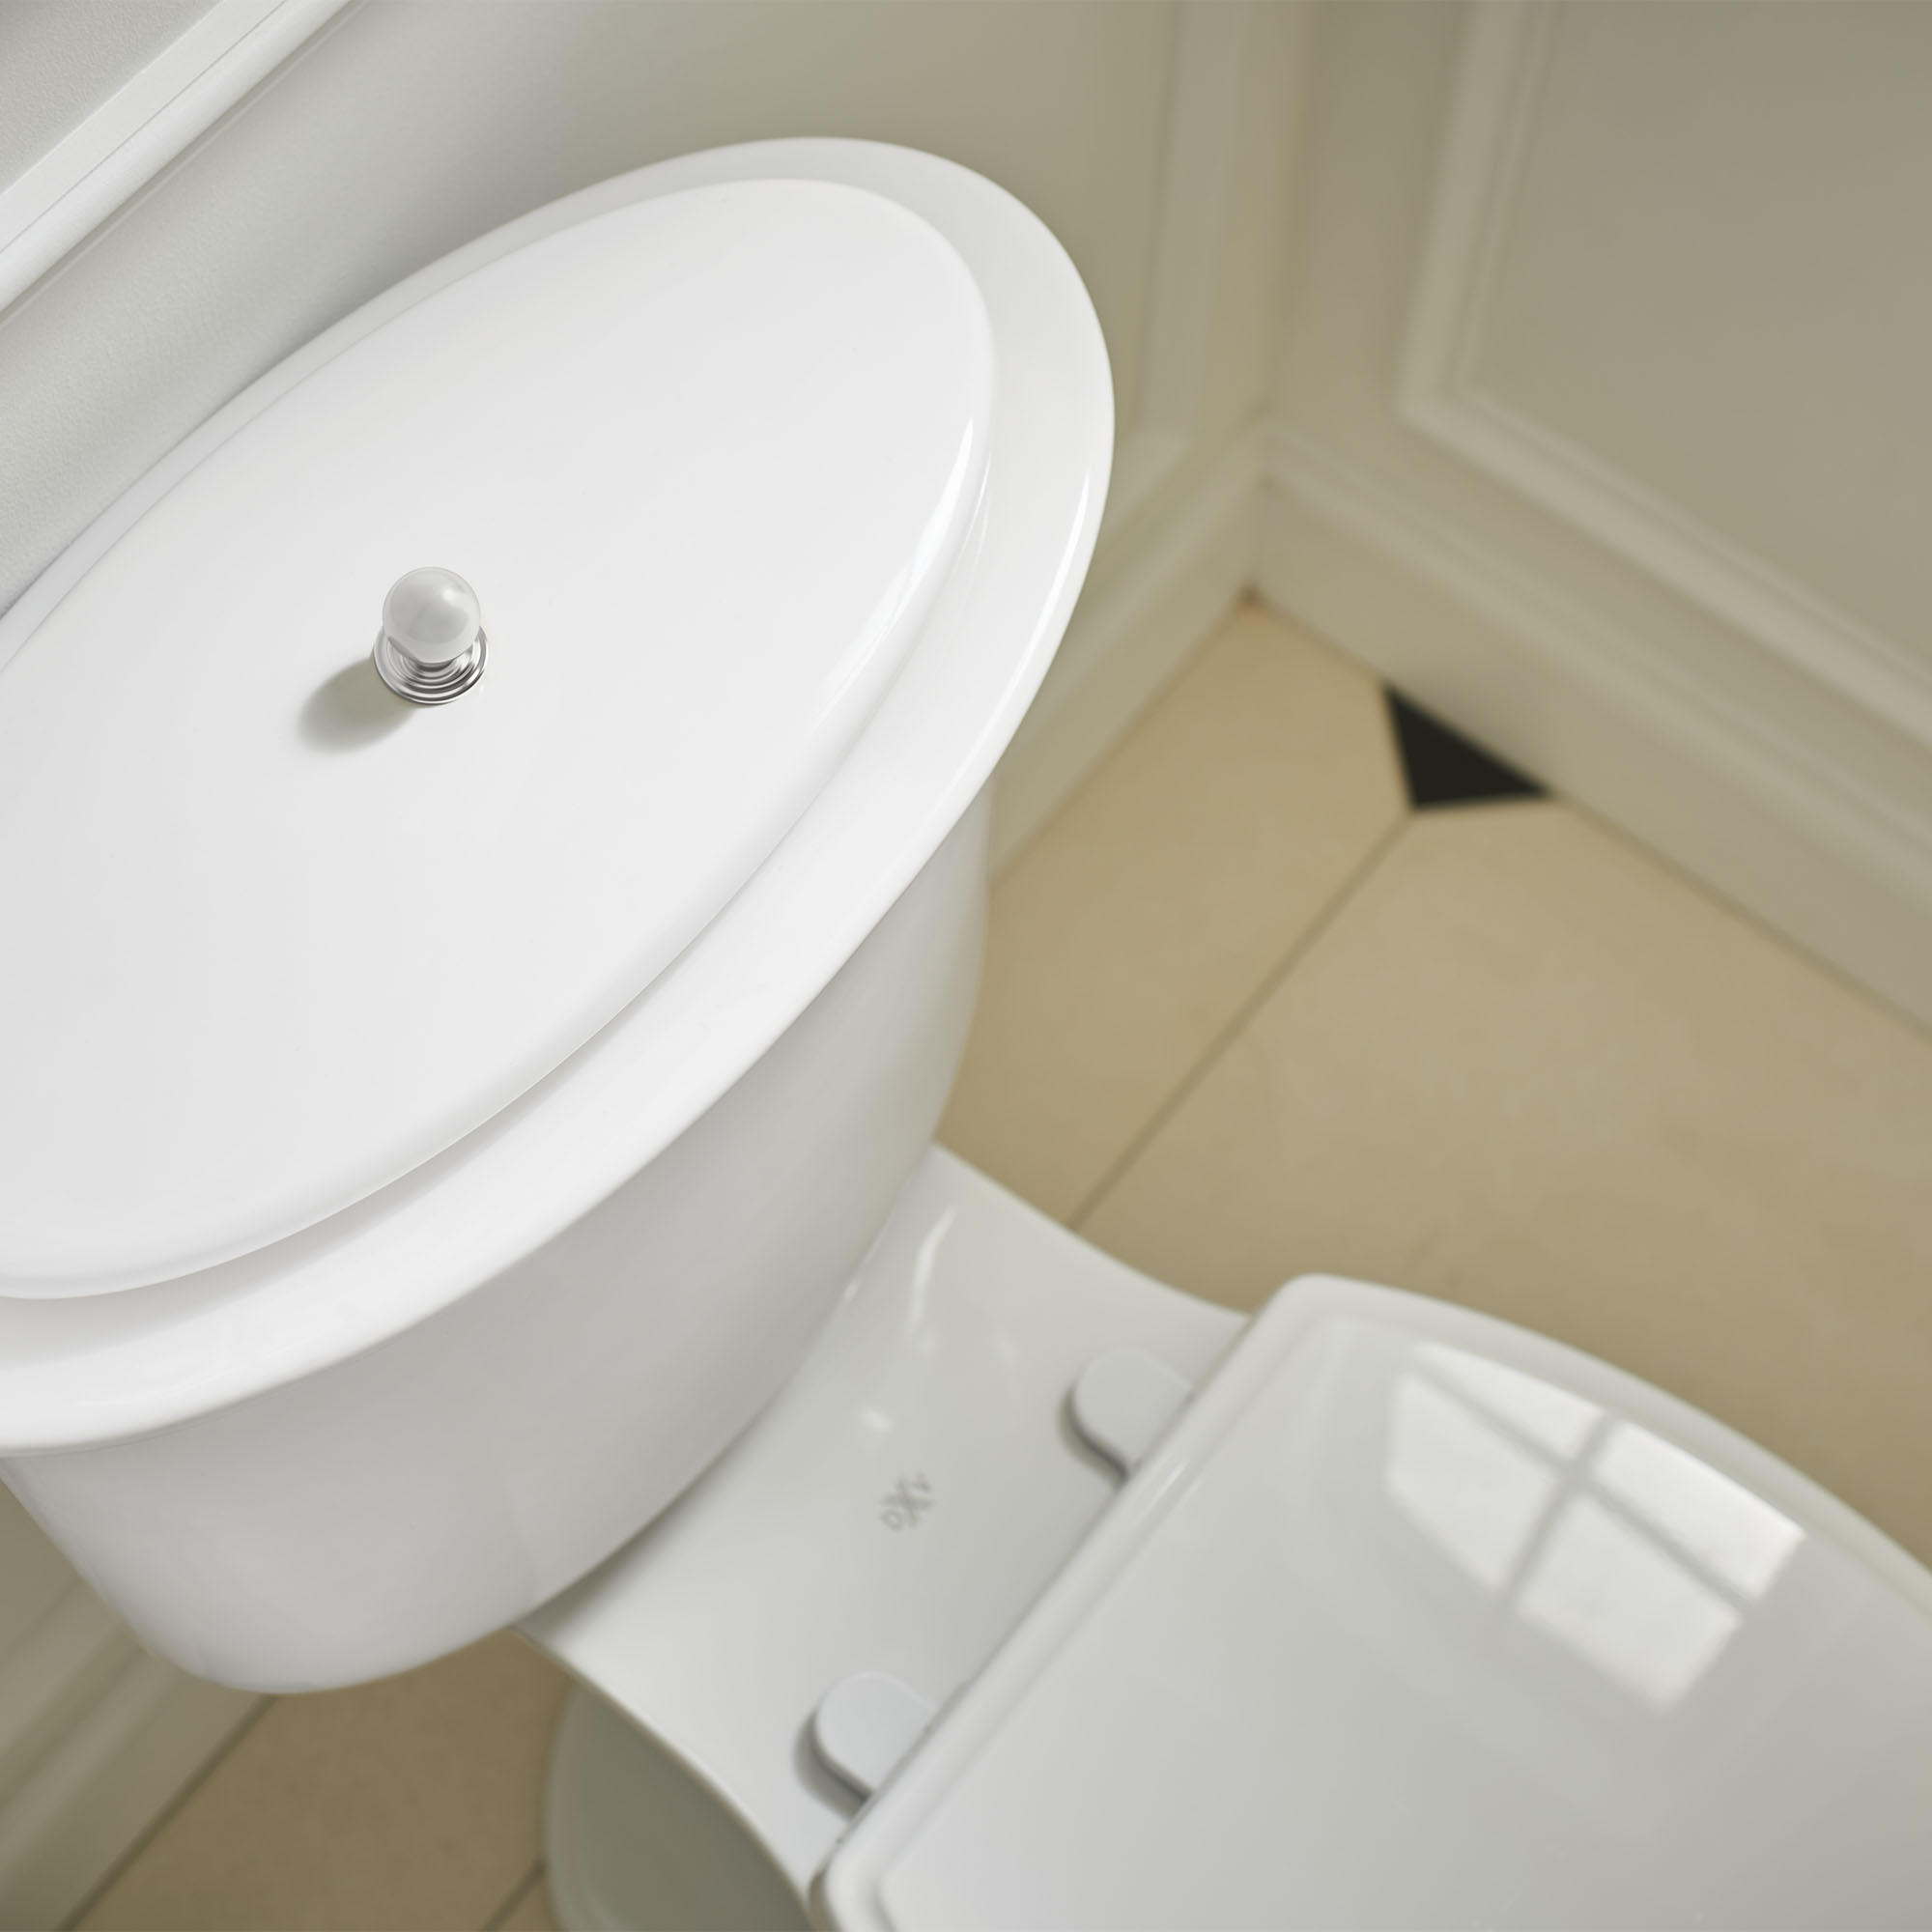 Oak Hill Two-Piece Chair Height Elongated Toilet with Seat